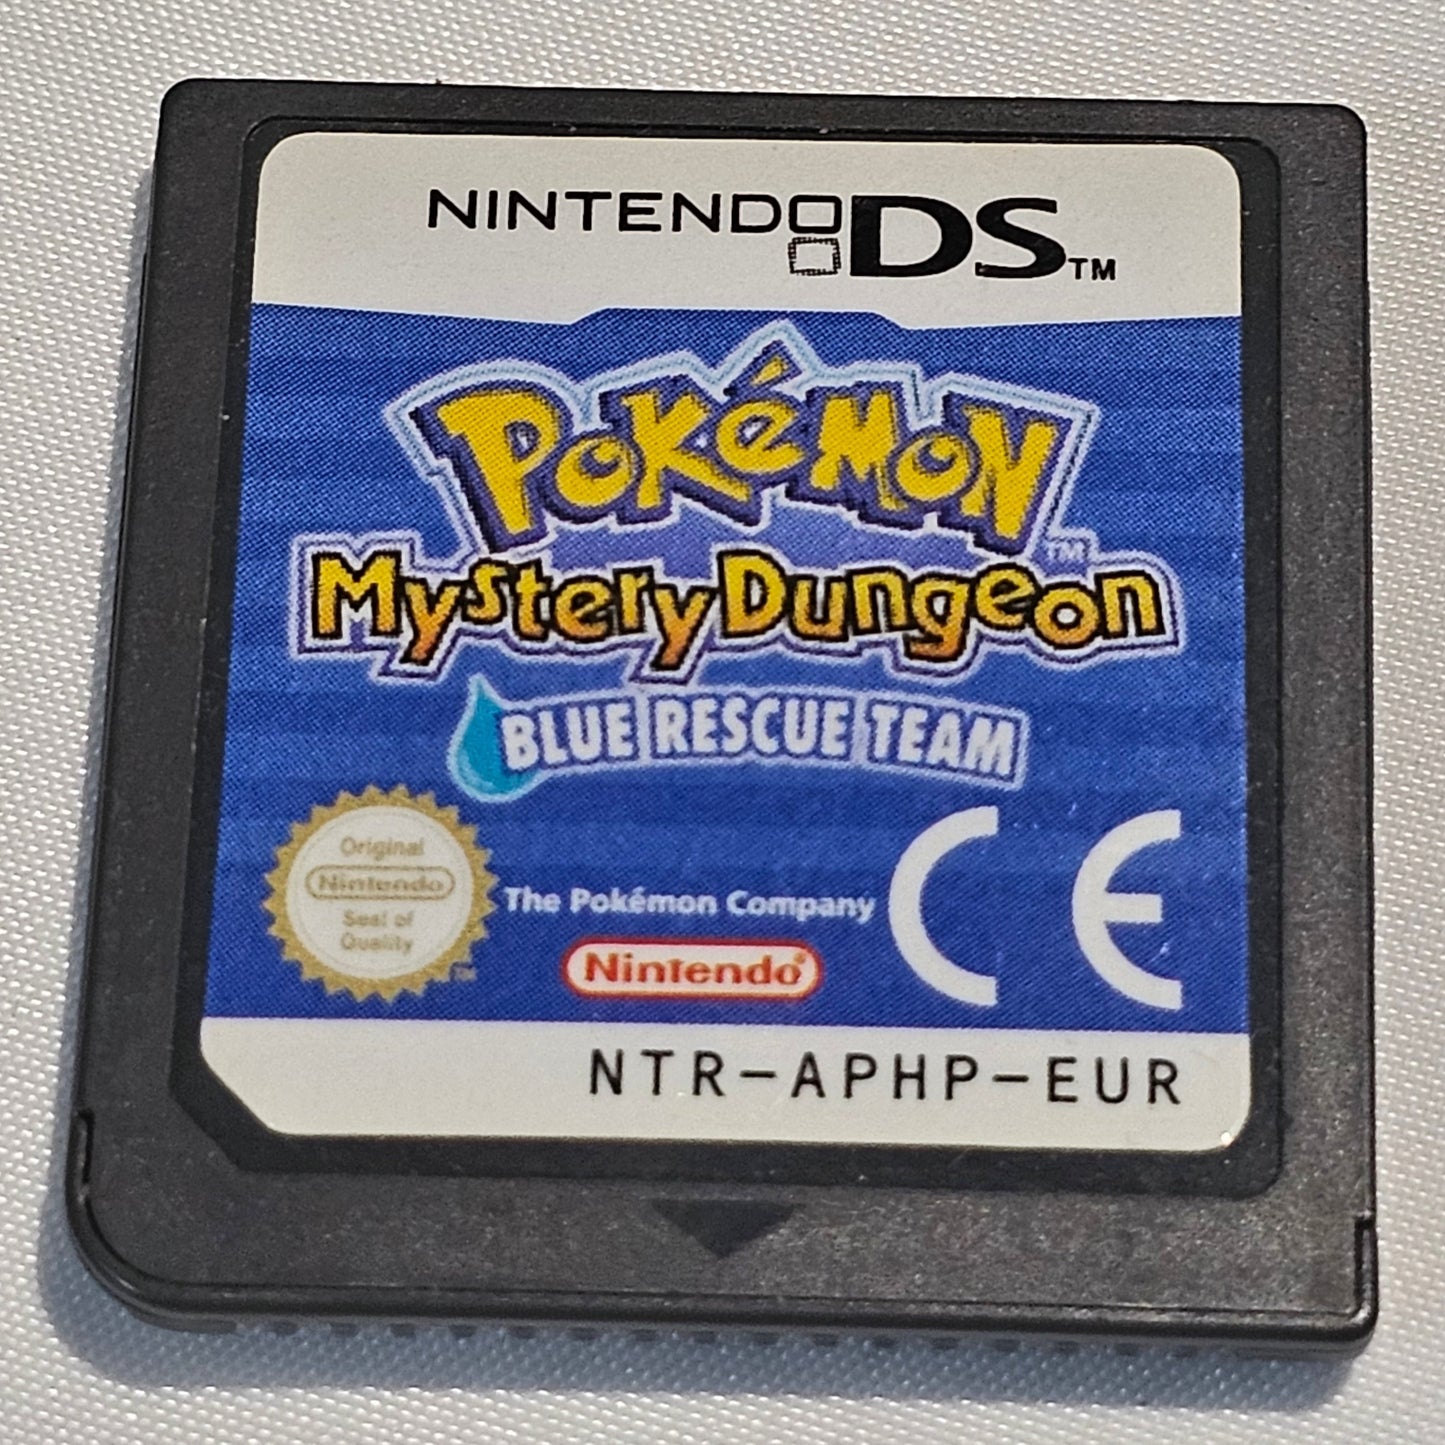 NDS Pokemon Mystery Dungeon Resque Team PAL